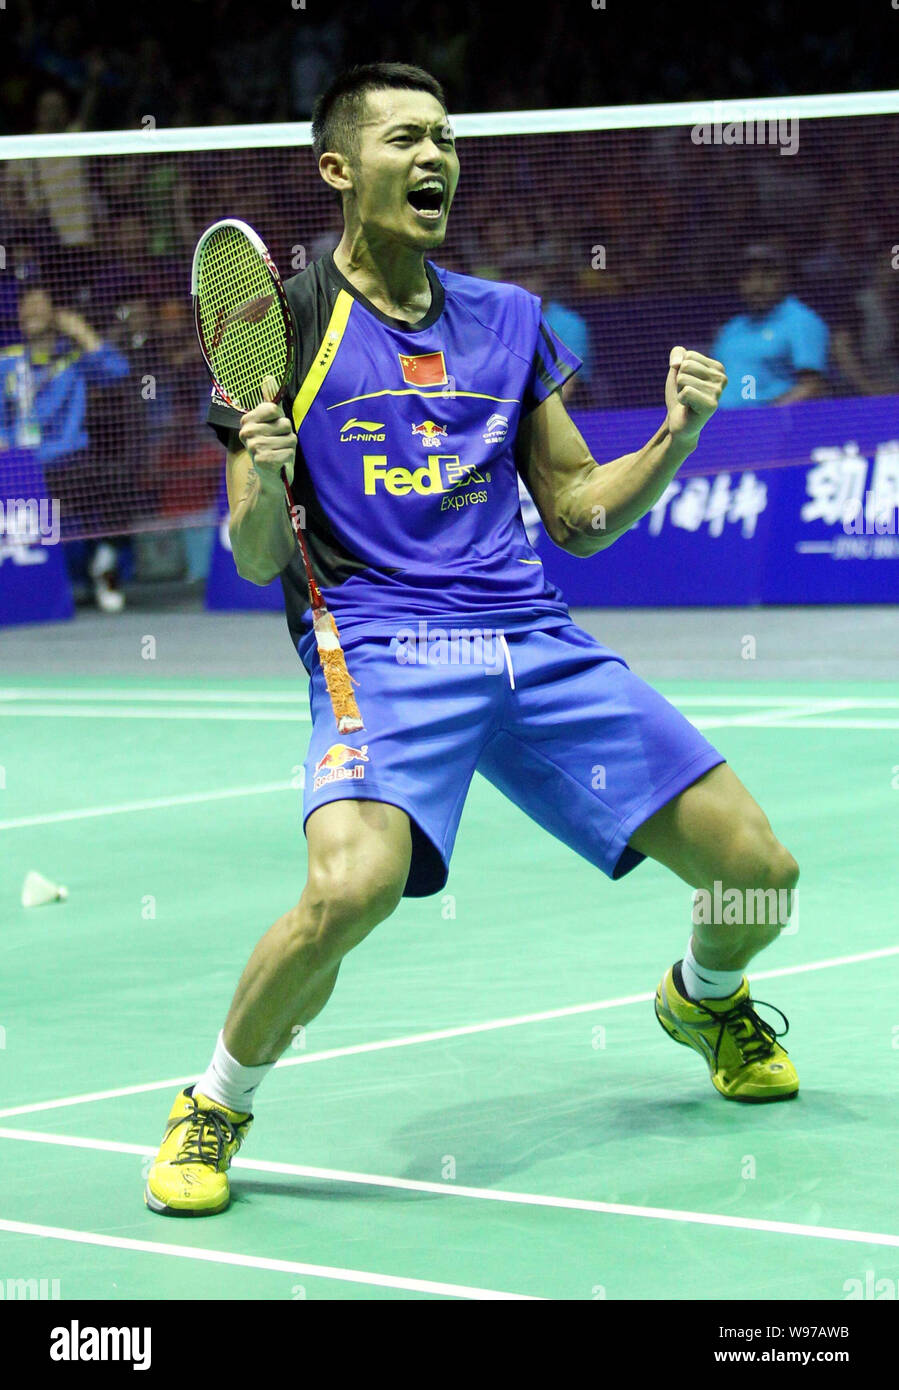 Lin Dan of China celebrates after defeating Lee Hyun-Il of South Korea during the final match of the Thomas Cup world badminton team championships in Stock Photo